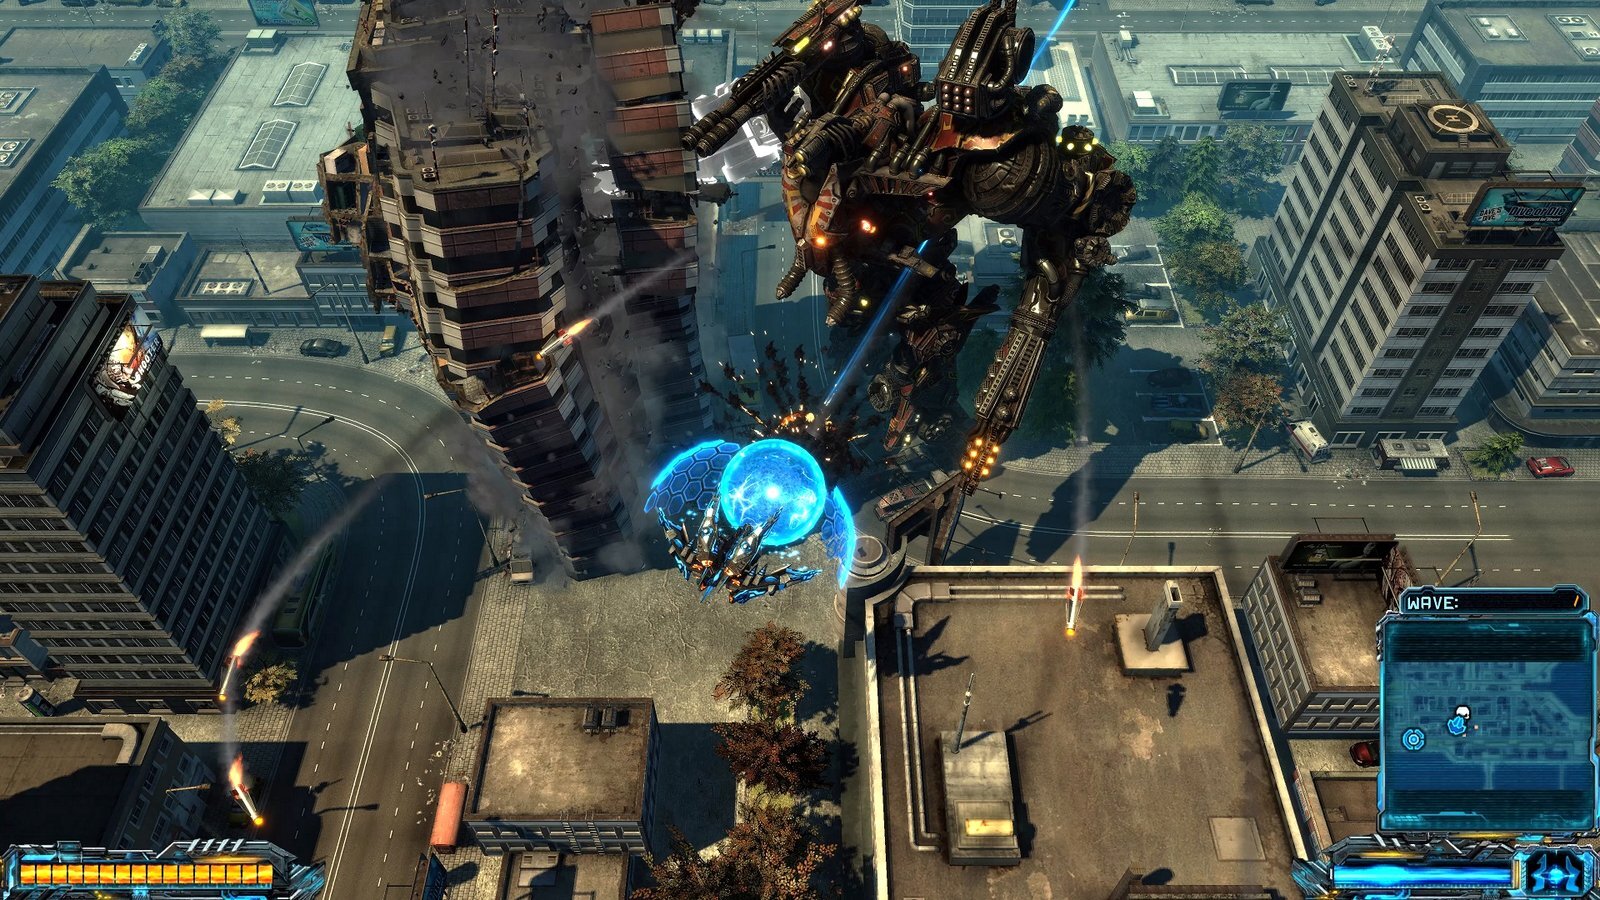 PS4's X-Morph: Defense is a unique hybrid of twin-stick shooter